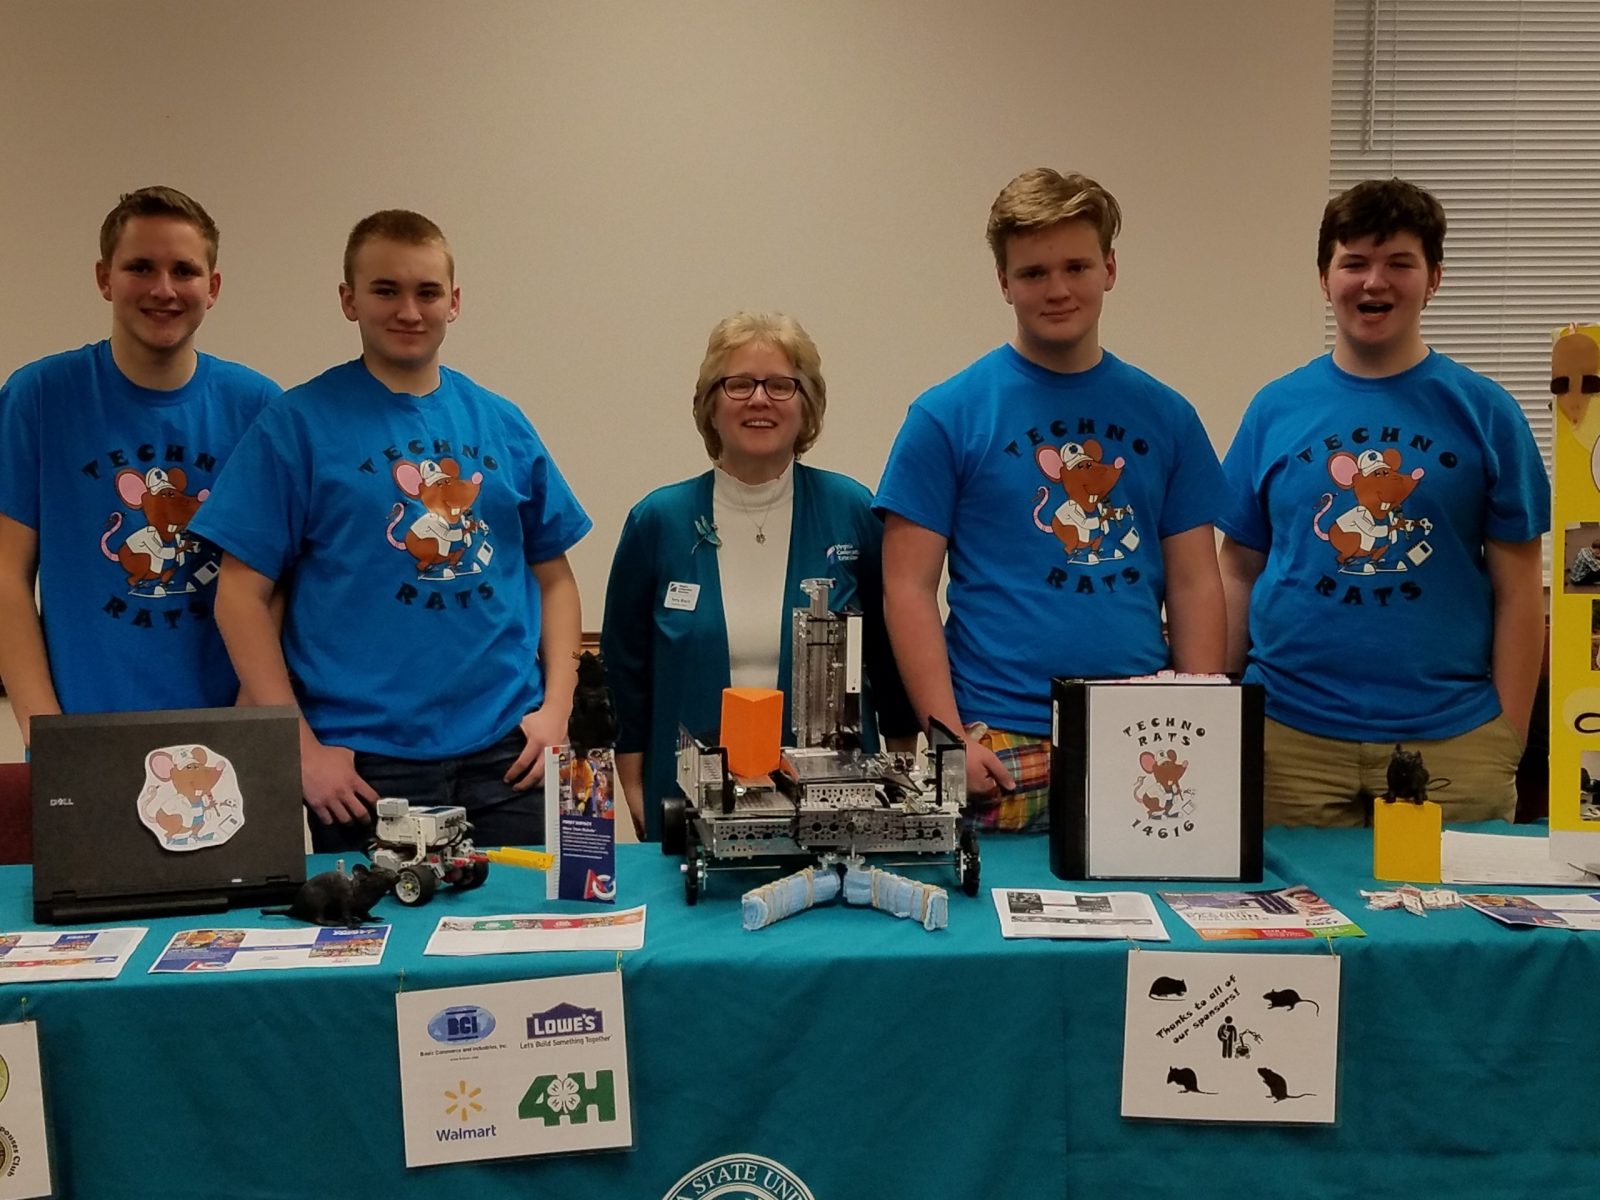 Robotics team in blue shirts with 4-H Agent and behind display table